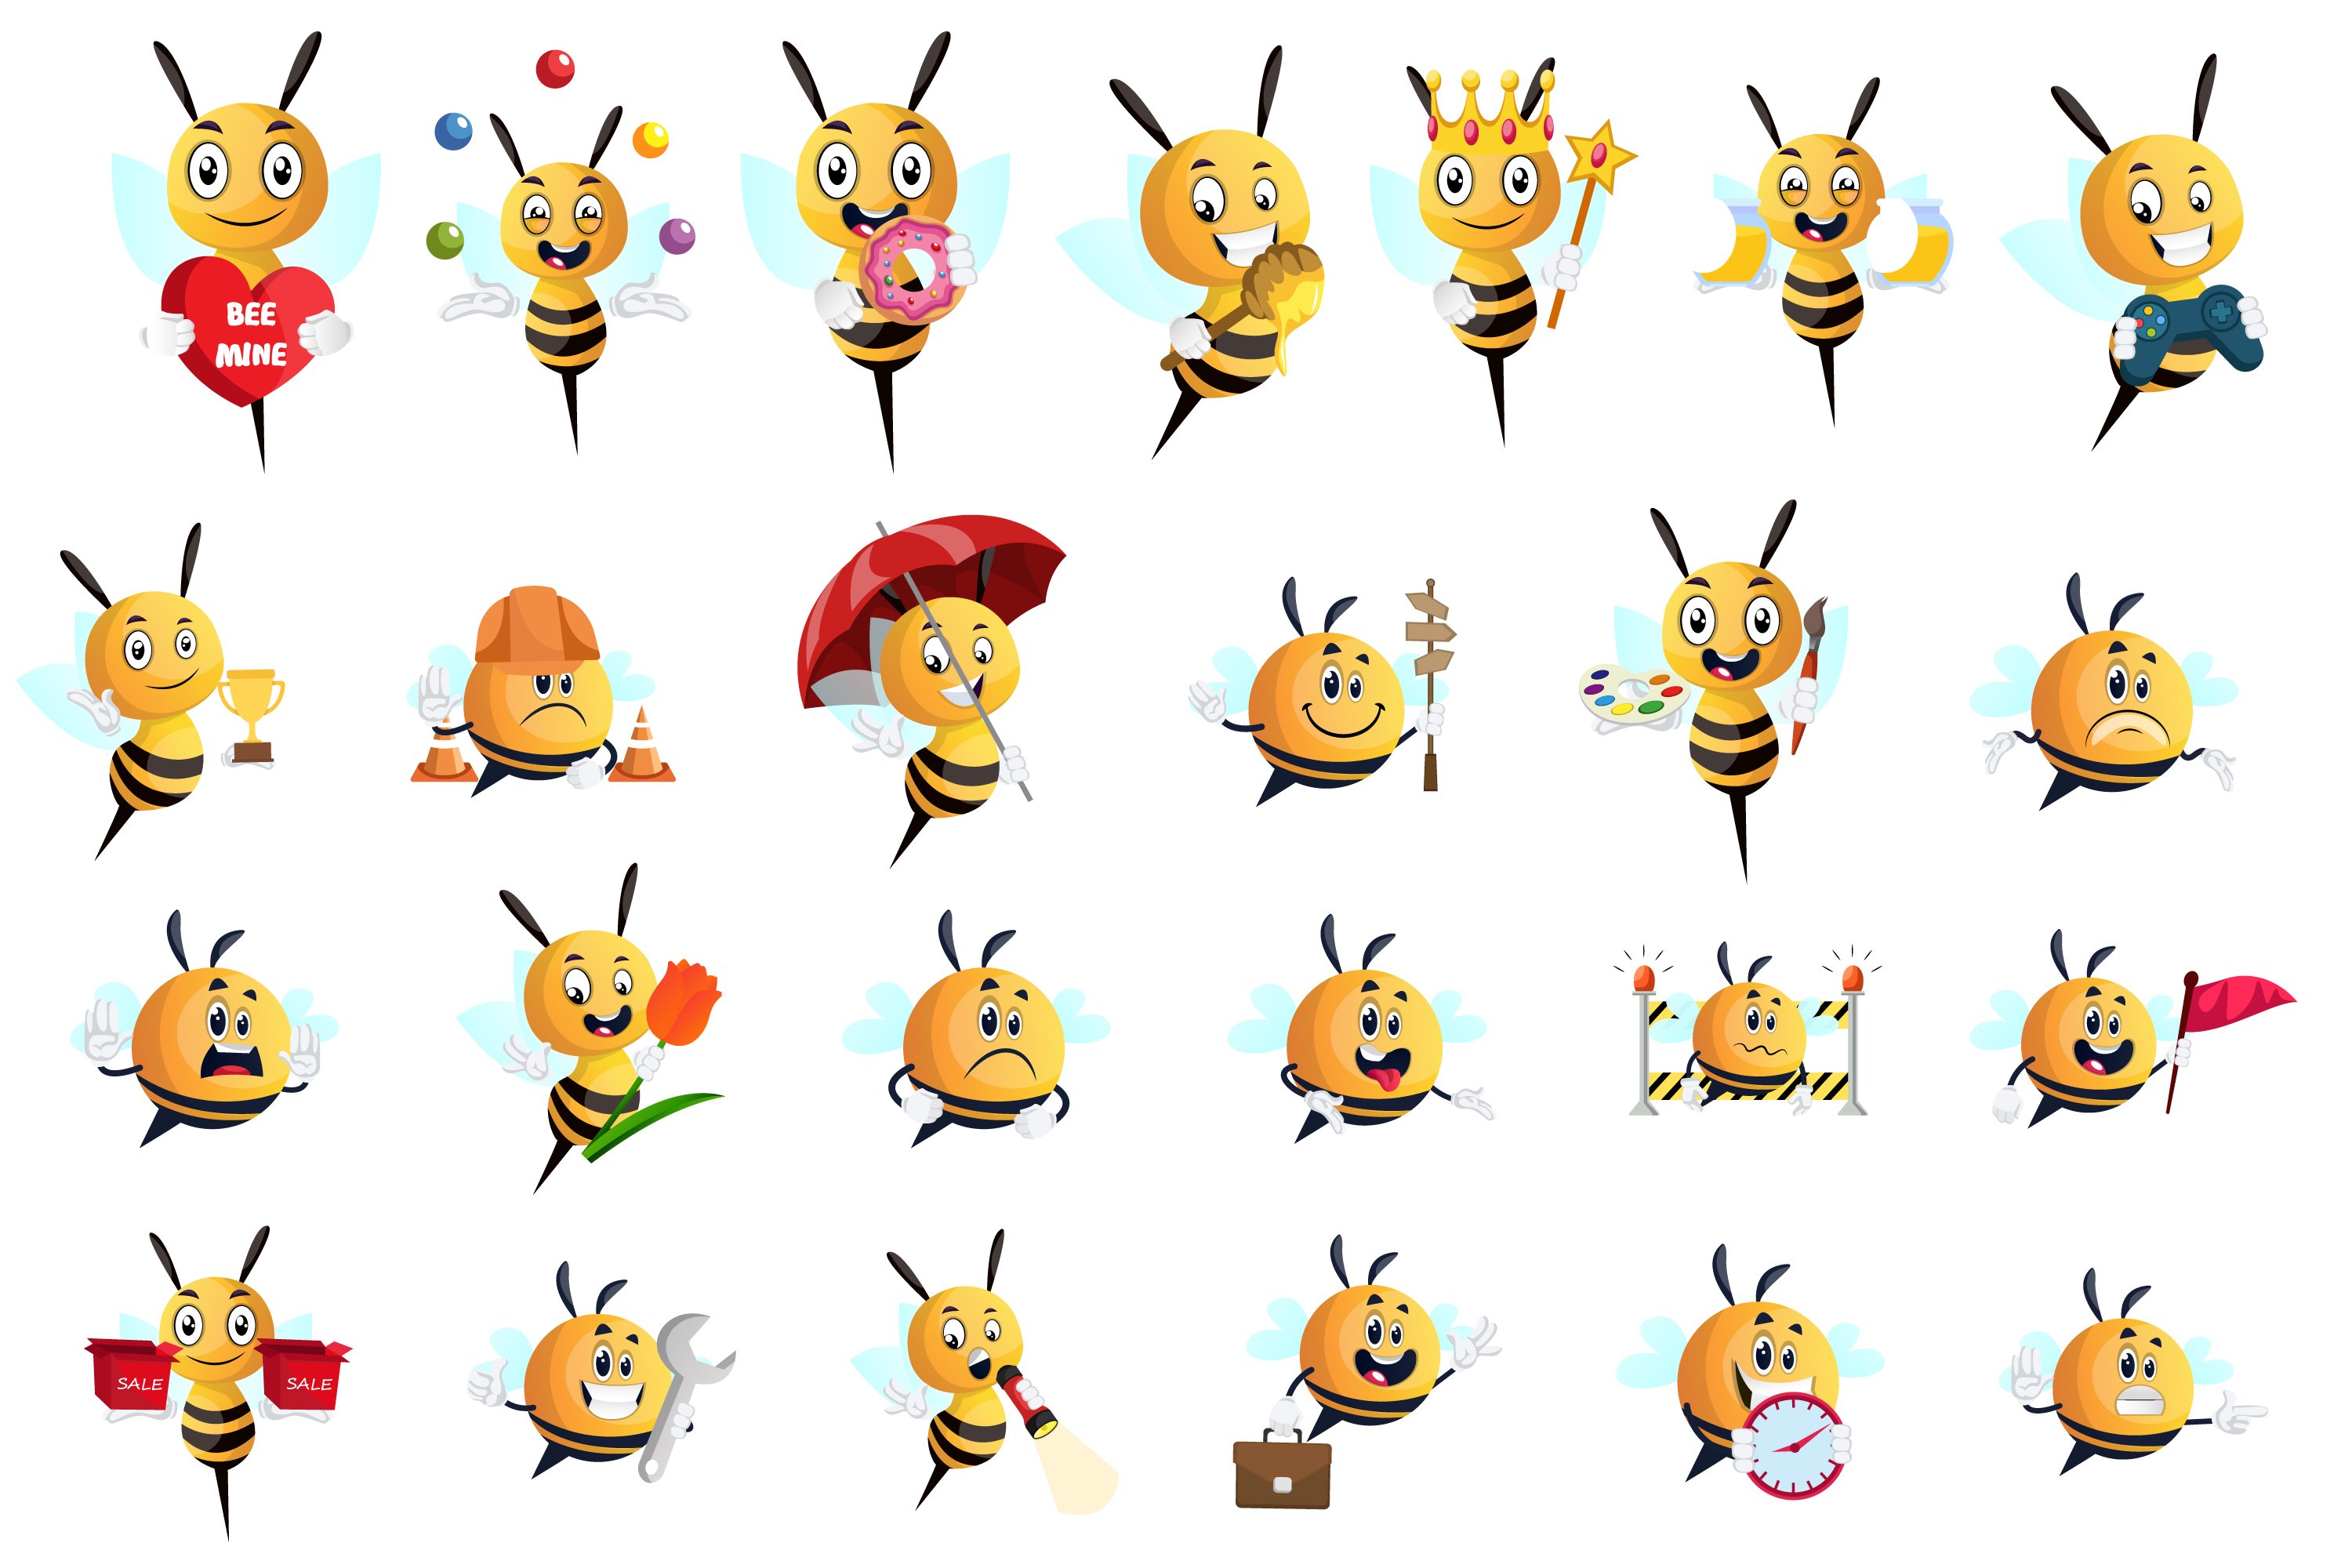 Various images of bees.